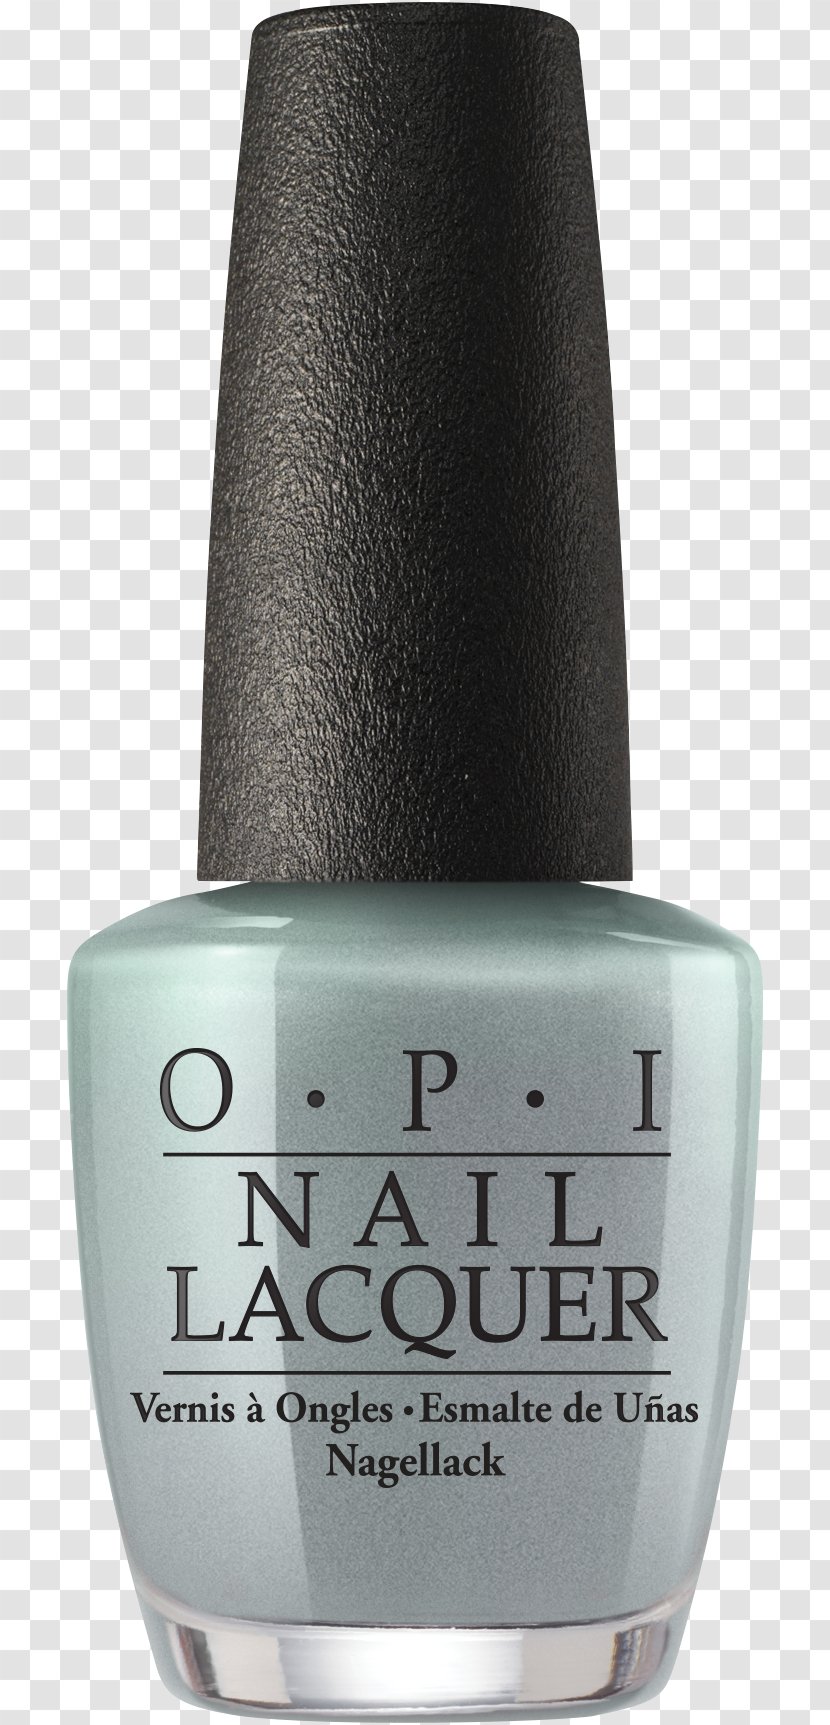 OPI Nail Lacquer Products Polish Cosmetics - Opi Transparent PNG